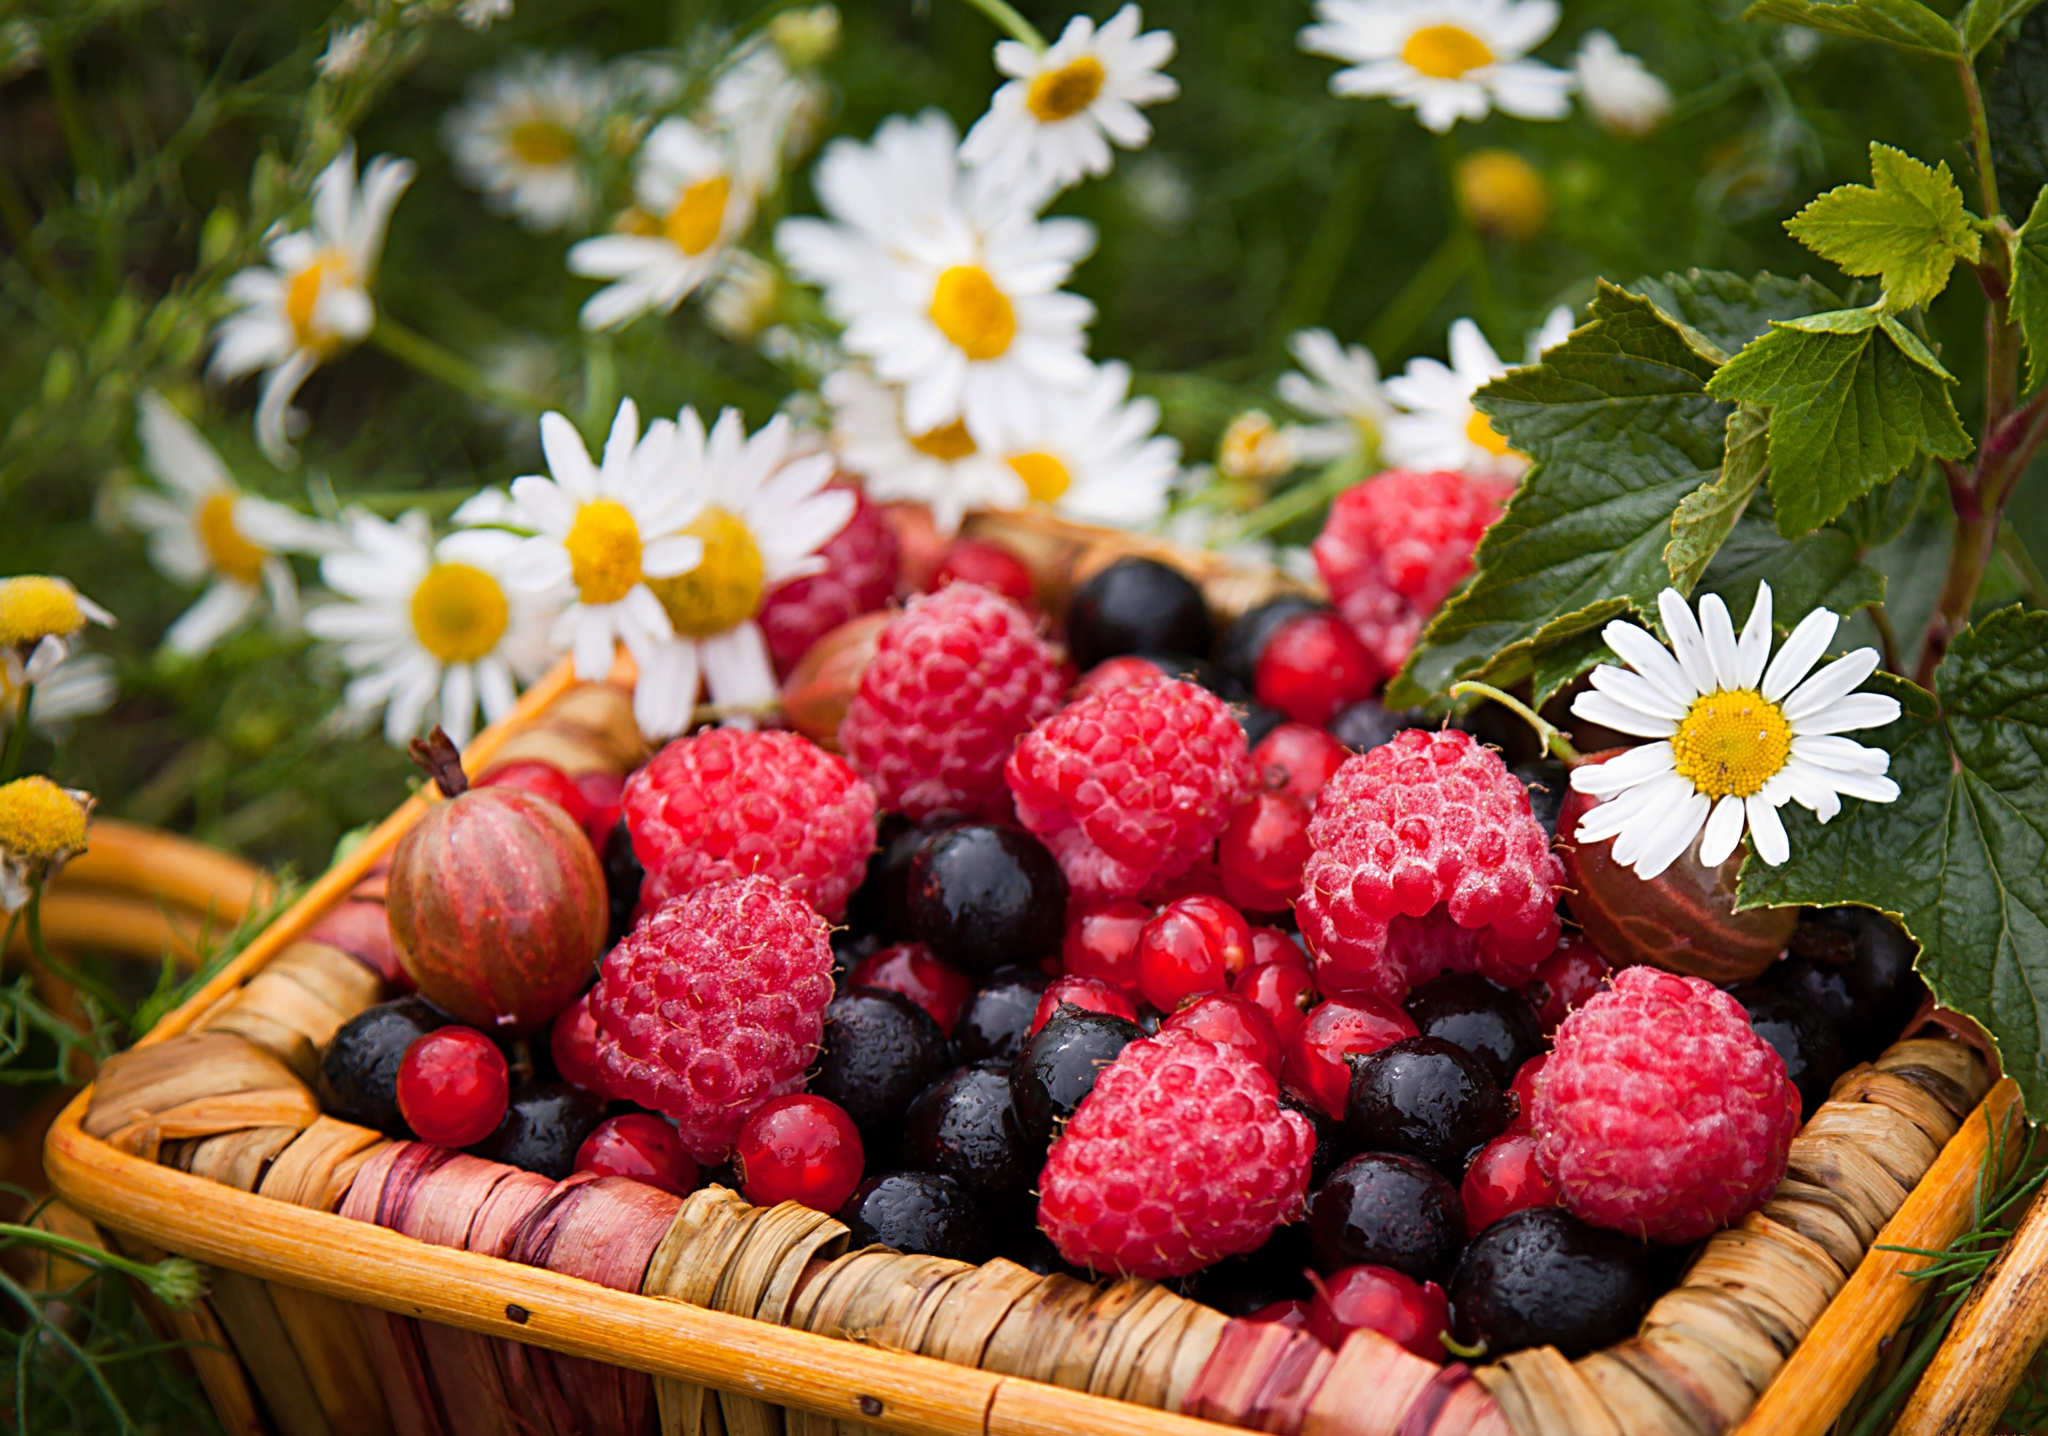 127221 download wallpaper food, camomile, raspberry, berries, currant, gooseberry, basket screensavers and pictures for free